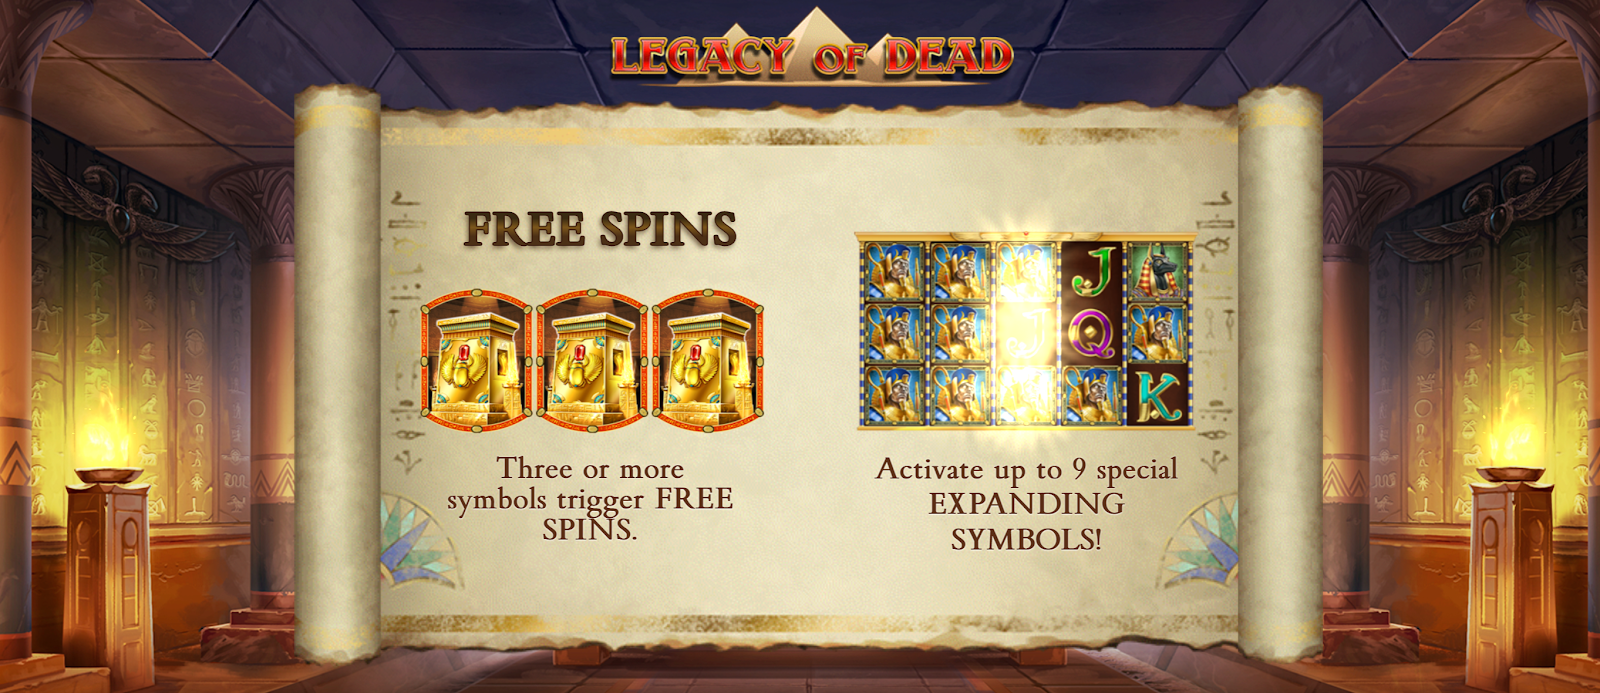 Legacy of Dead has a great spins feature